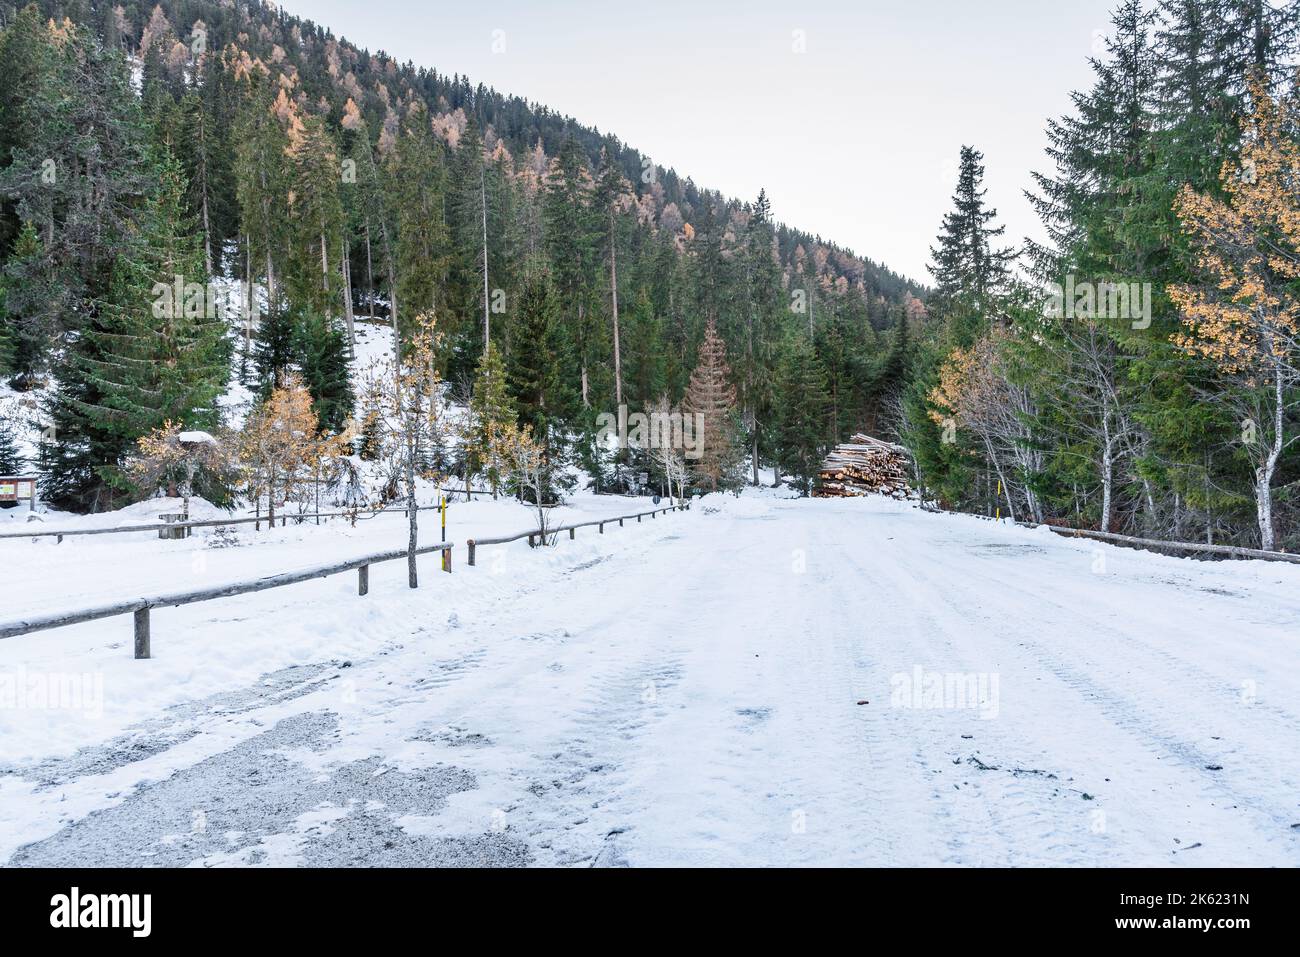 Empty snowy parking lot at the foot of forested slopes in the mountains in autumn Stock Photo